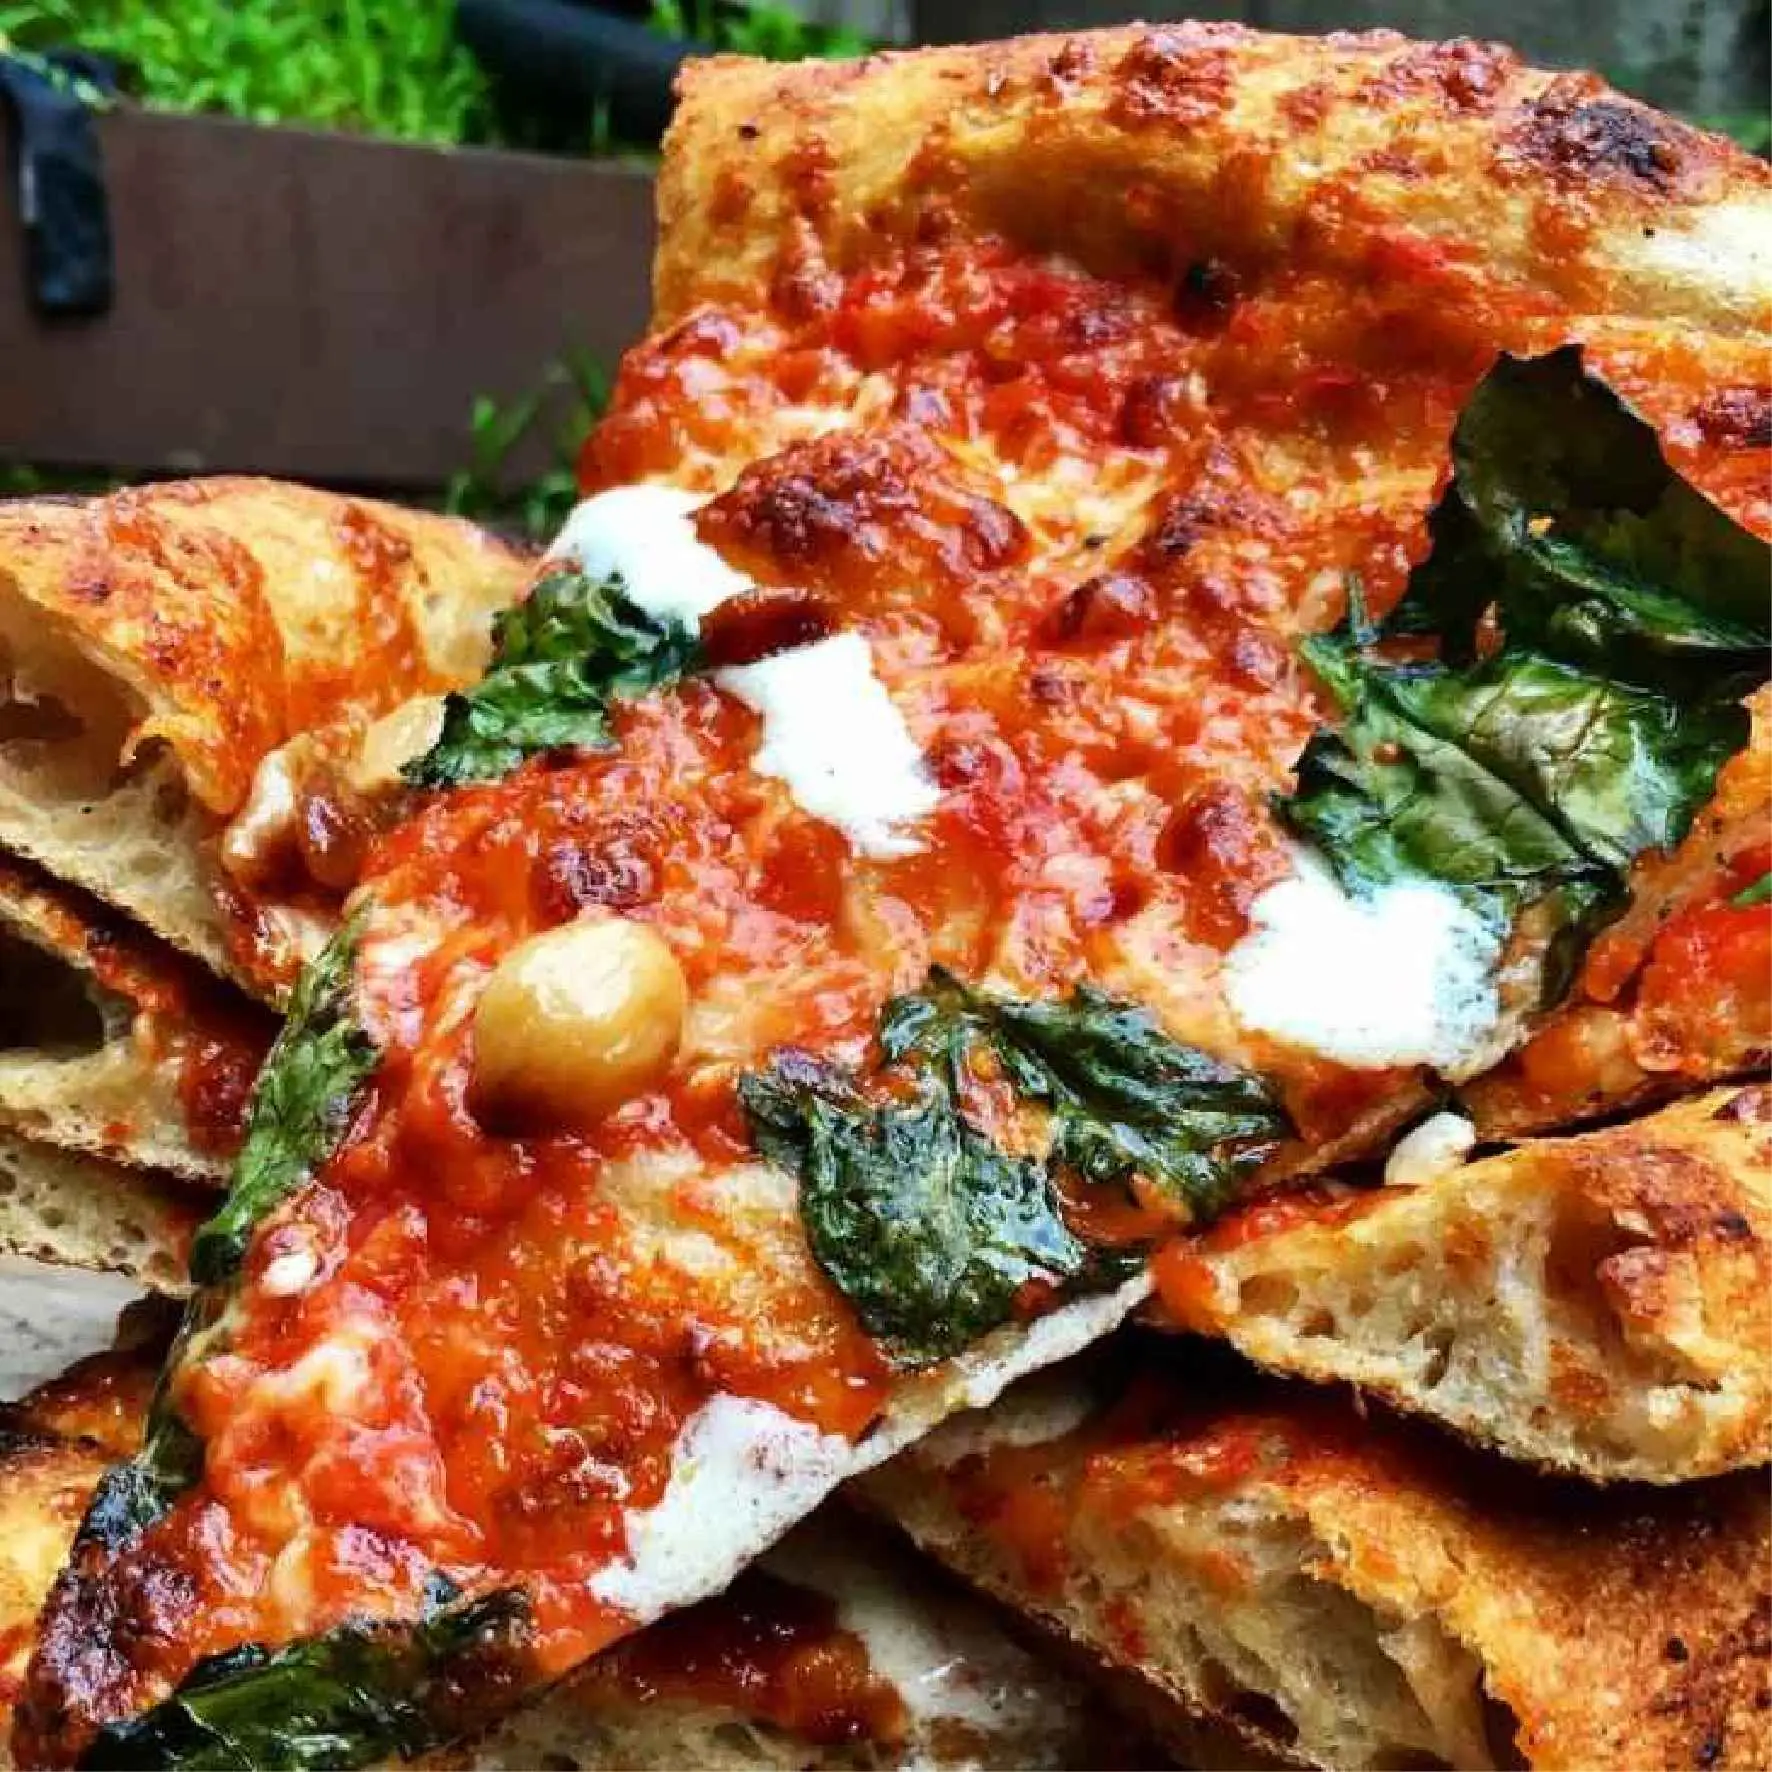 Josey Pizza Making Class - April 20 Delivery